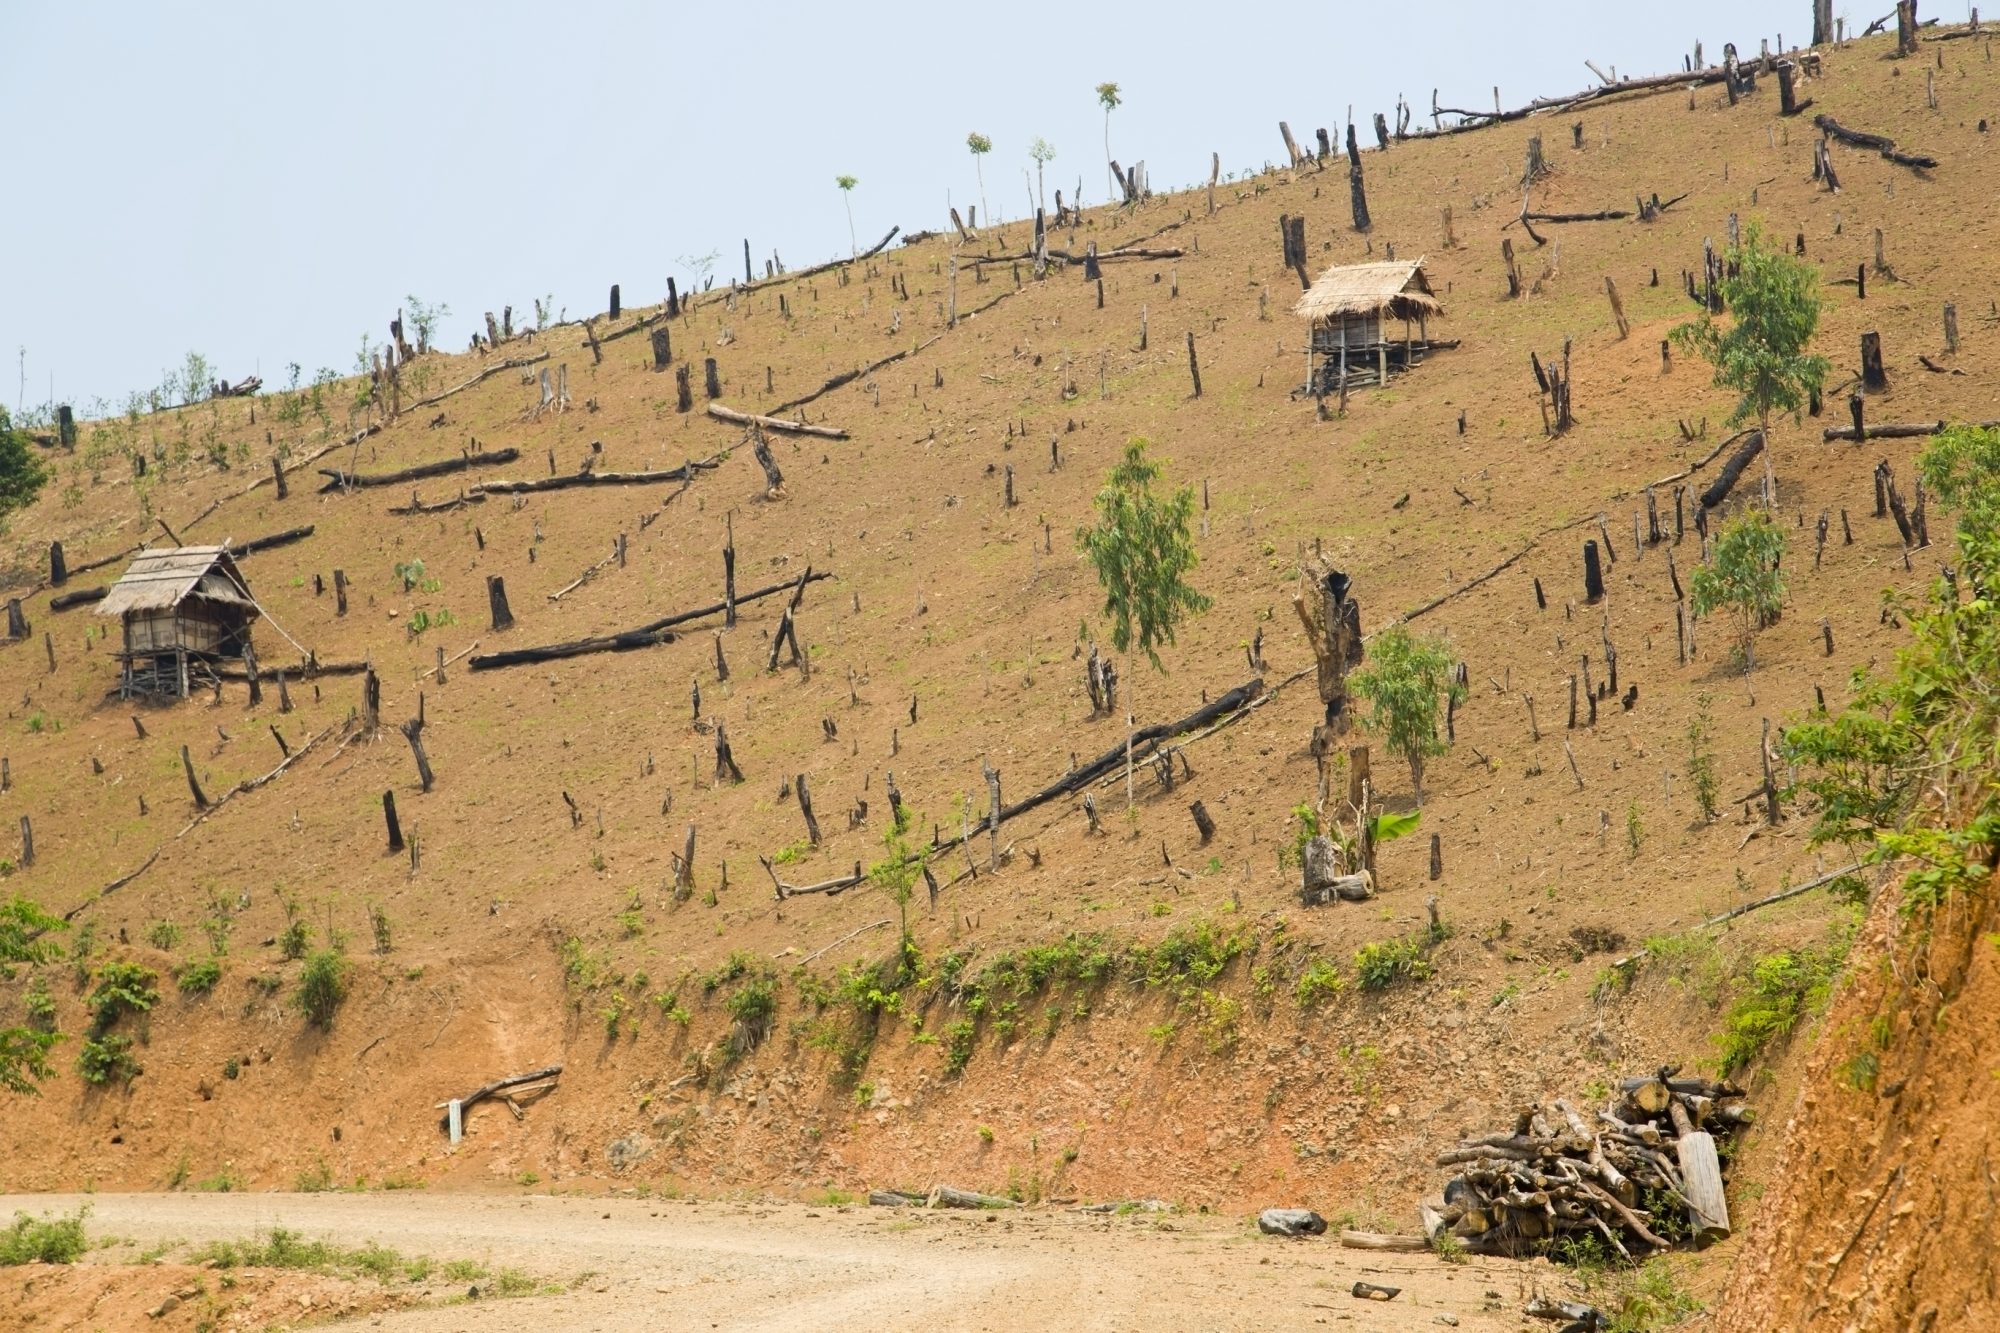 deforestation in less economically developed countries, contributing to climate change with carbon emissions